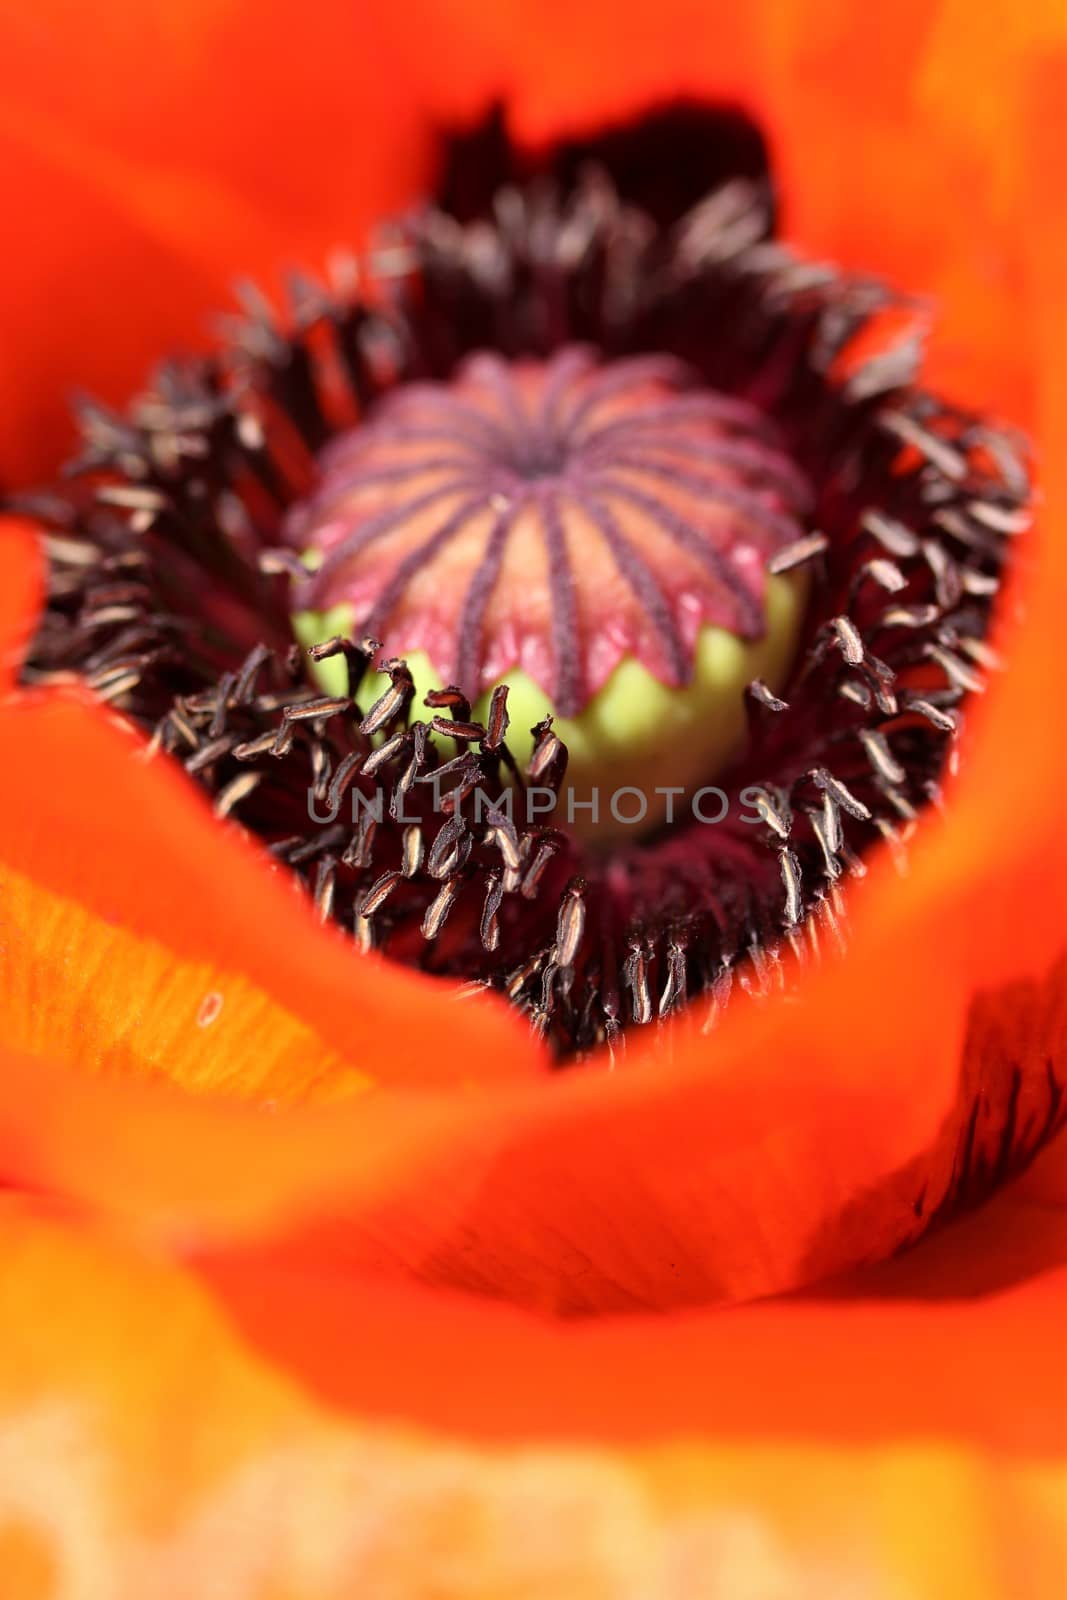 A close up of the insideof a red poppy flower by Luise123